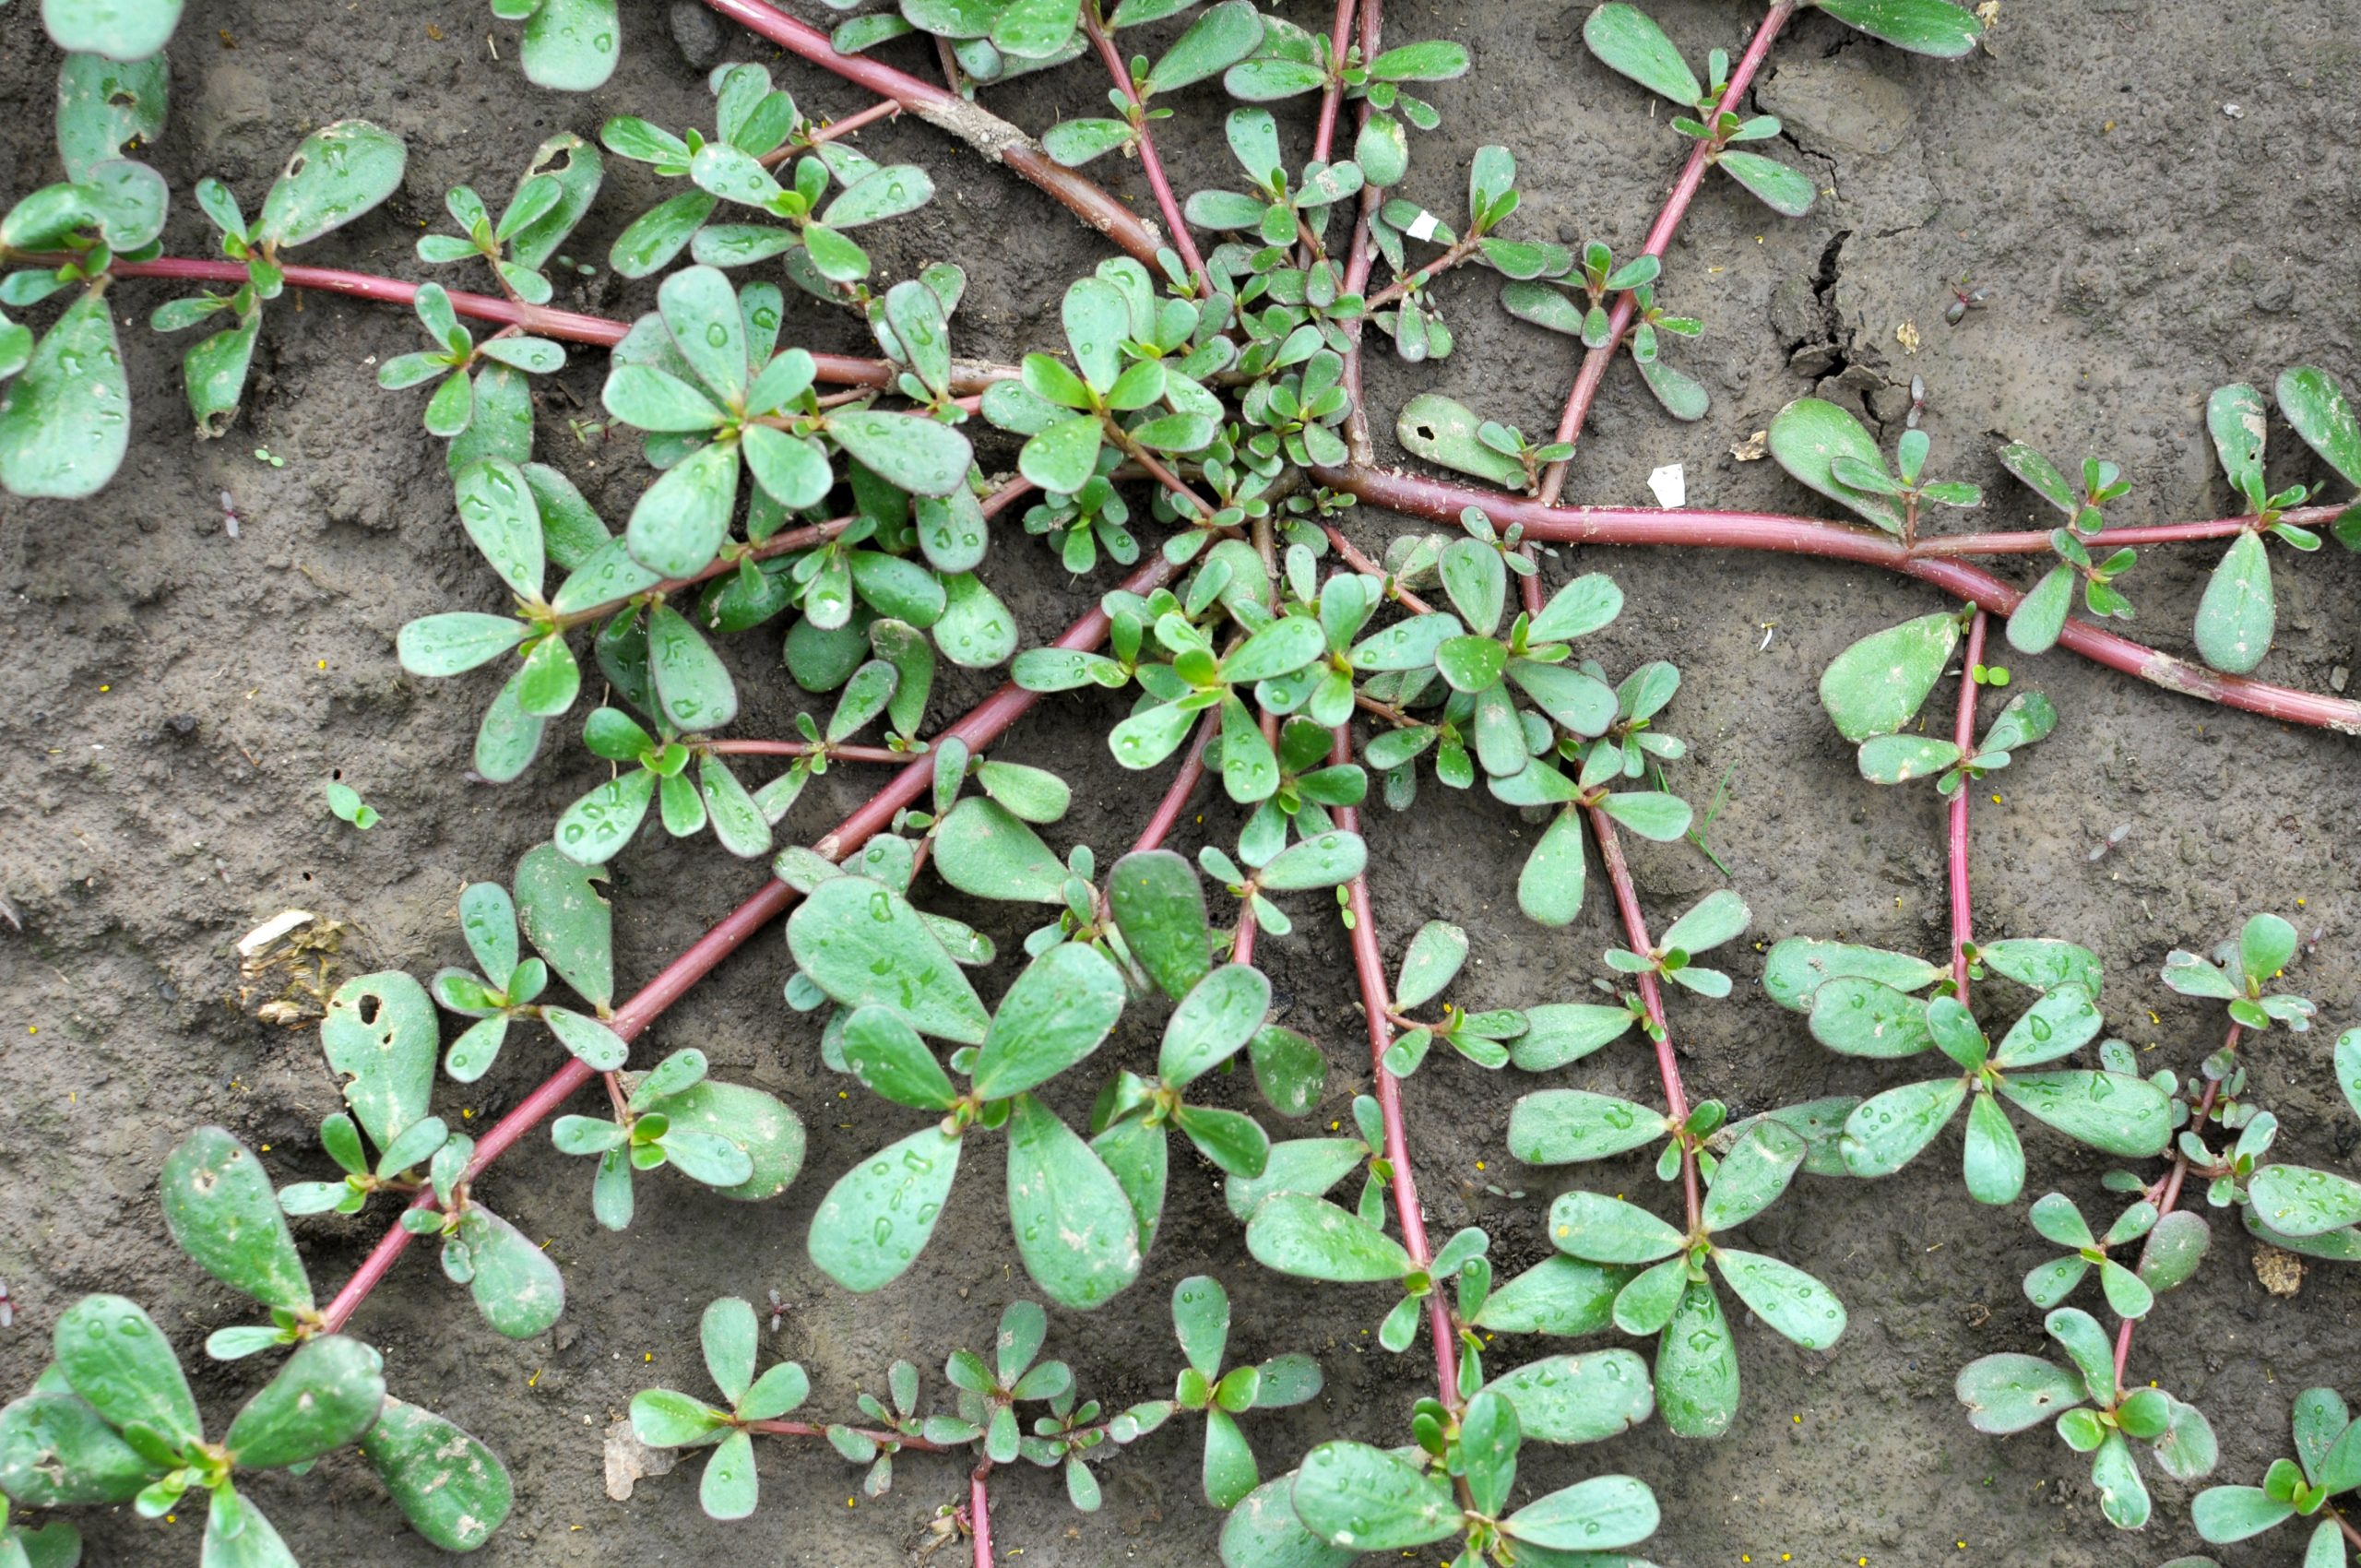 Purslane Weed, red stems crawling along ground with a rounded green leaves